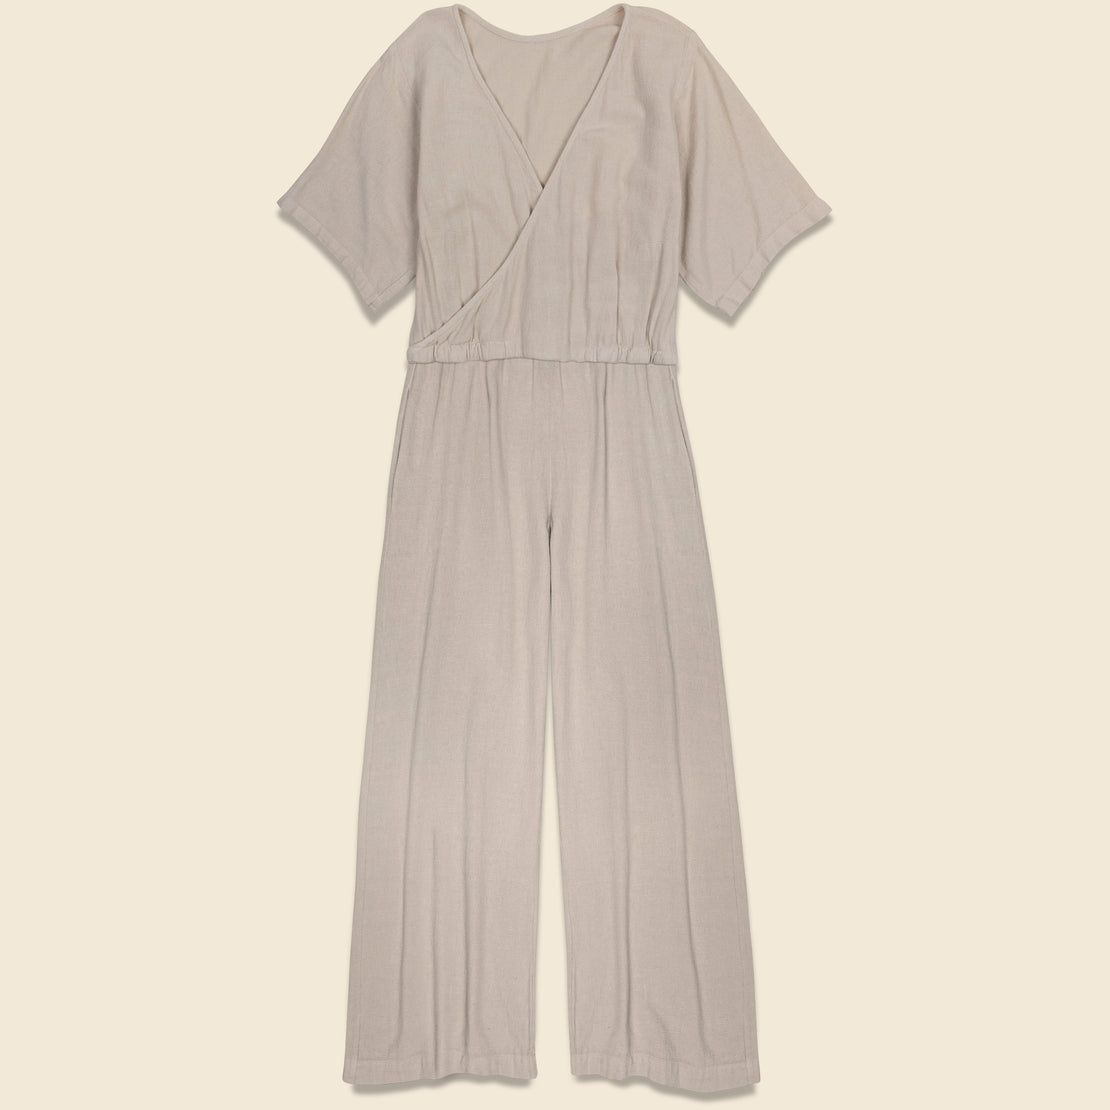 Duffy Jumper - Natural - Esby - STAG Provisions - W - Onepiece - Jumpsuit